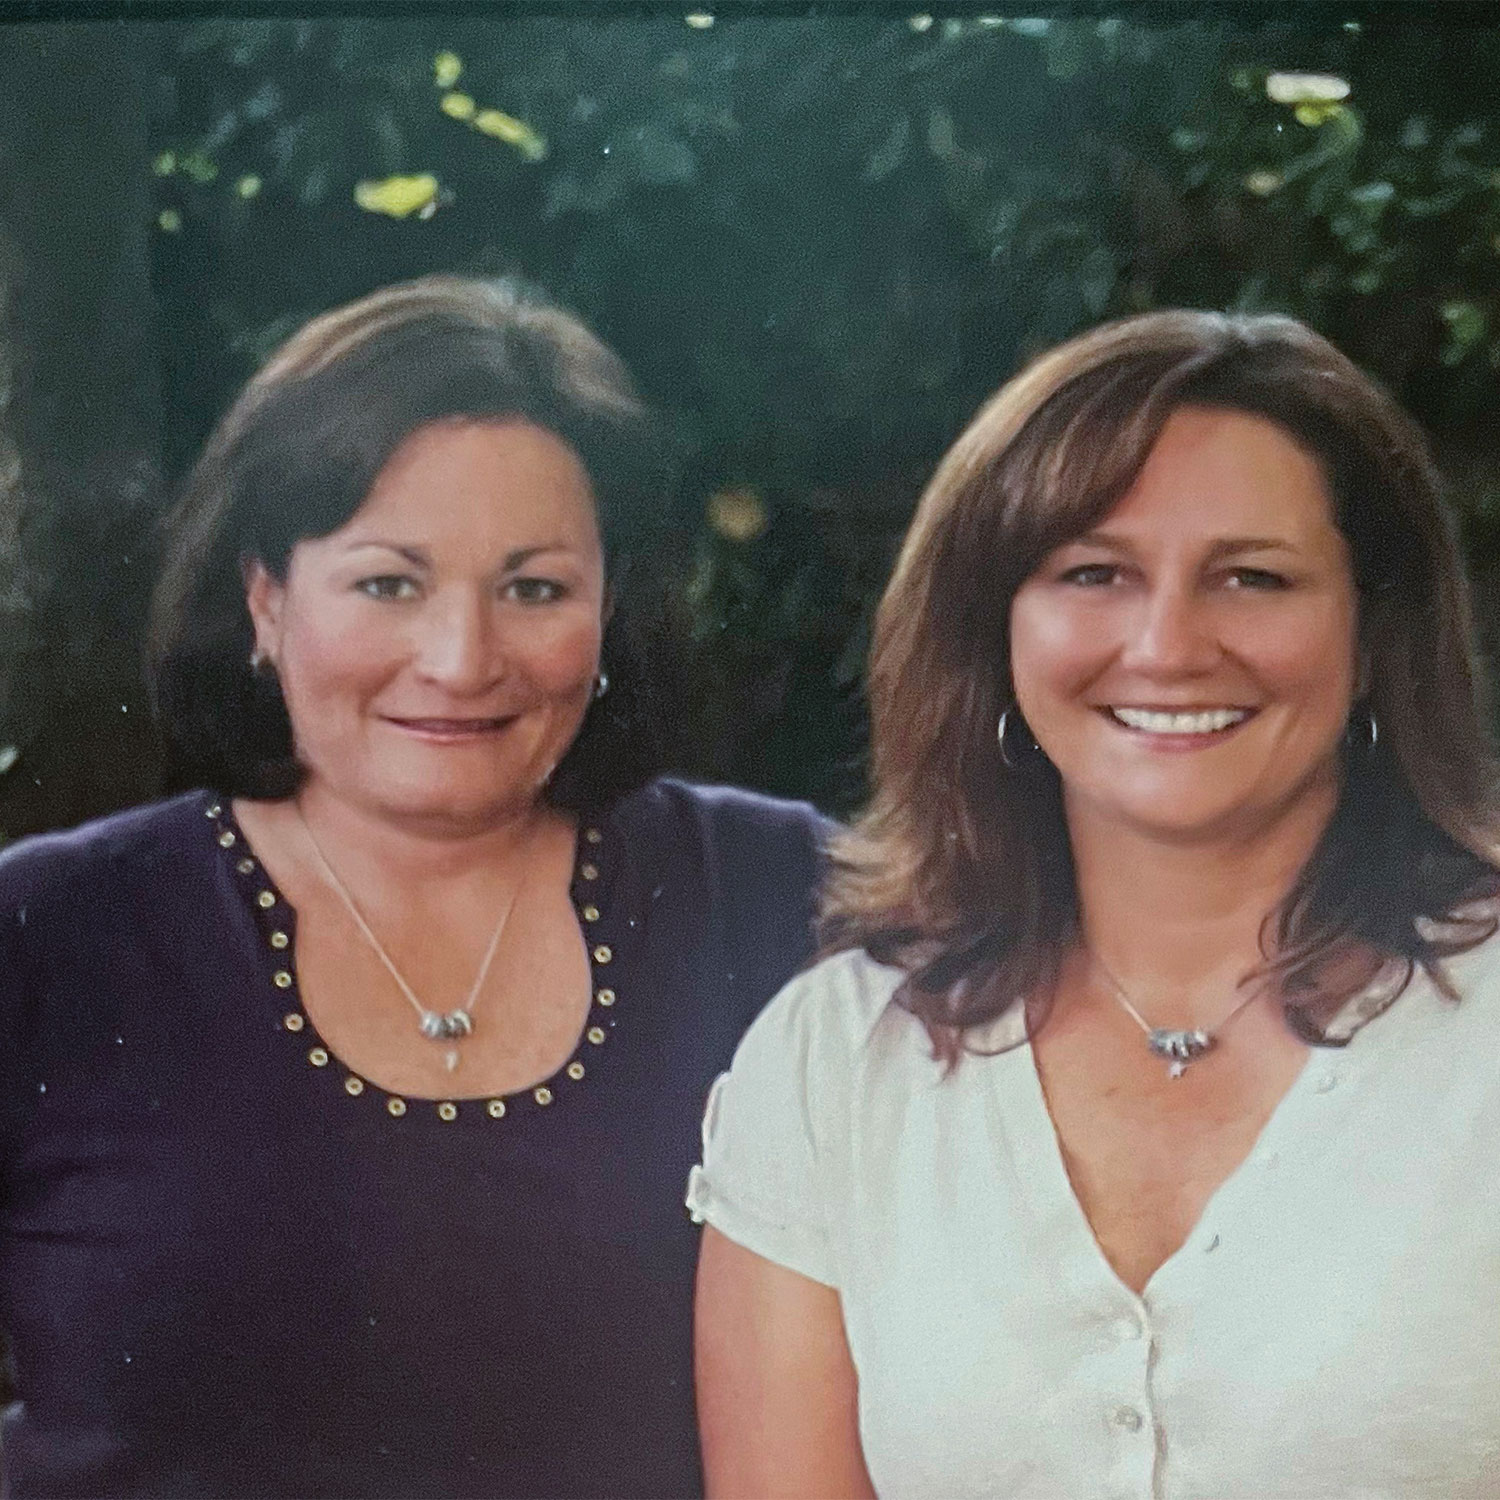 Two women, Katie McConnell Oliver and Monica Weakley, standing beside each other and smiling for the camera